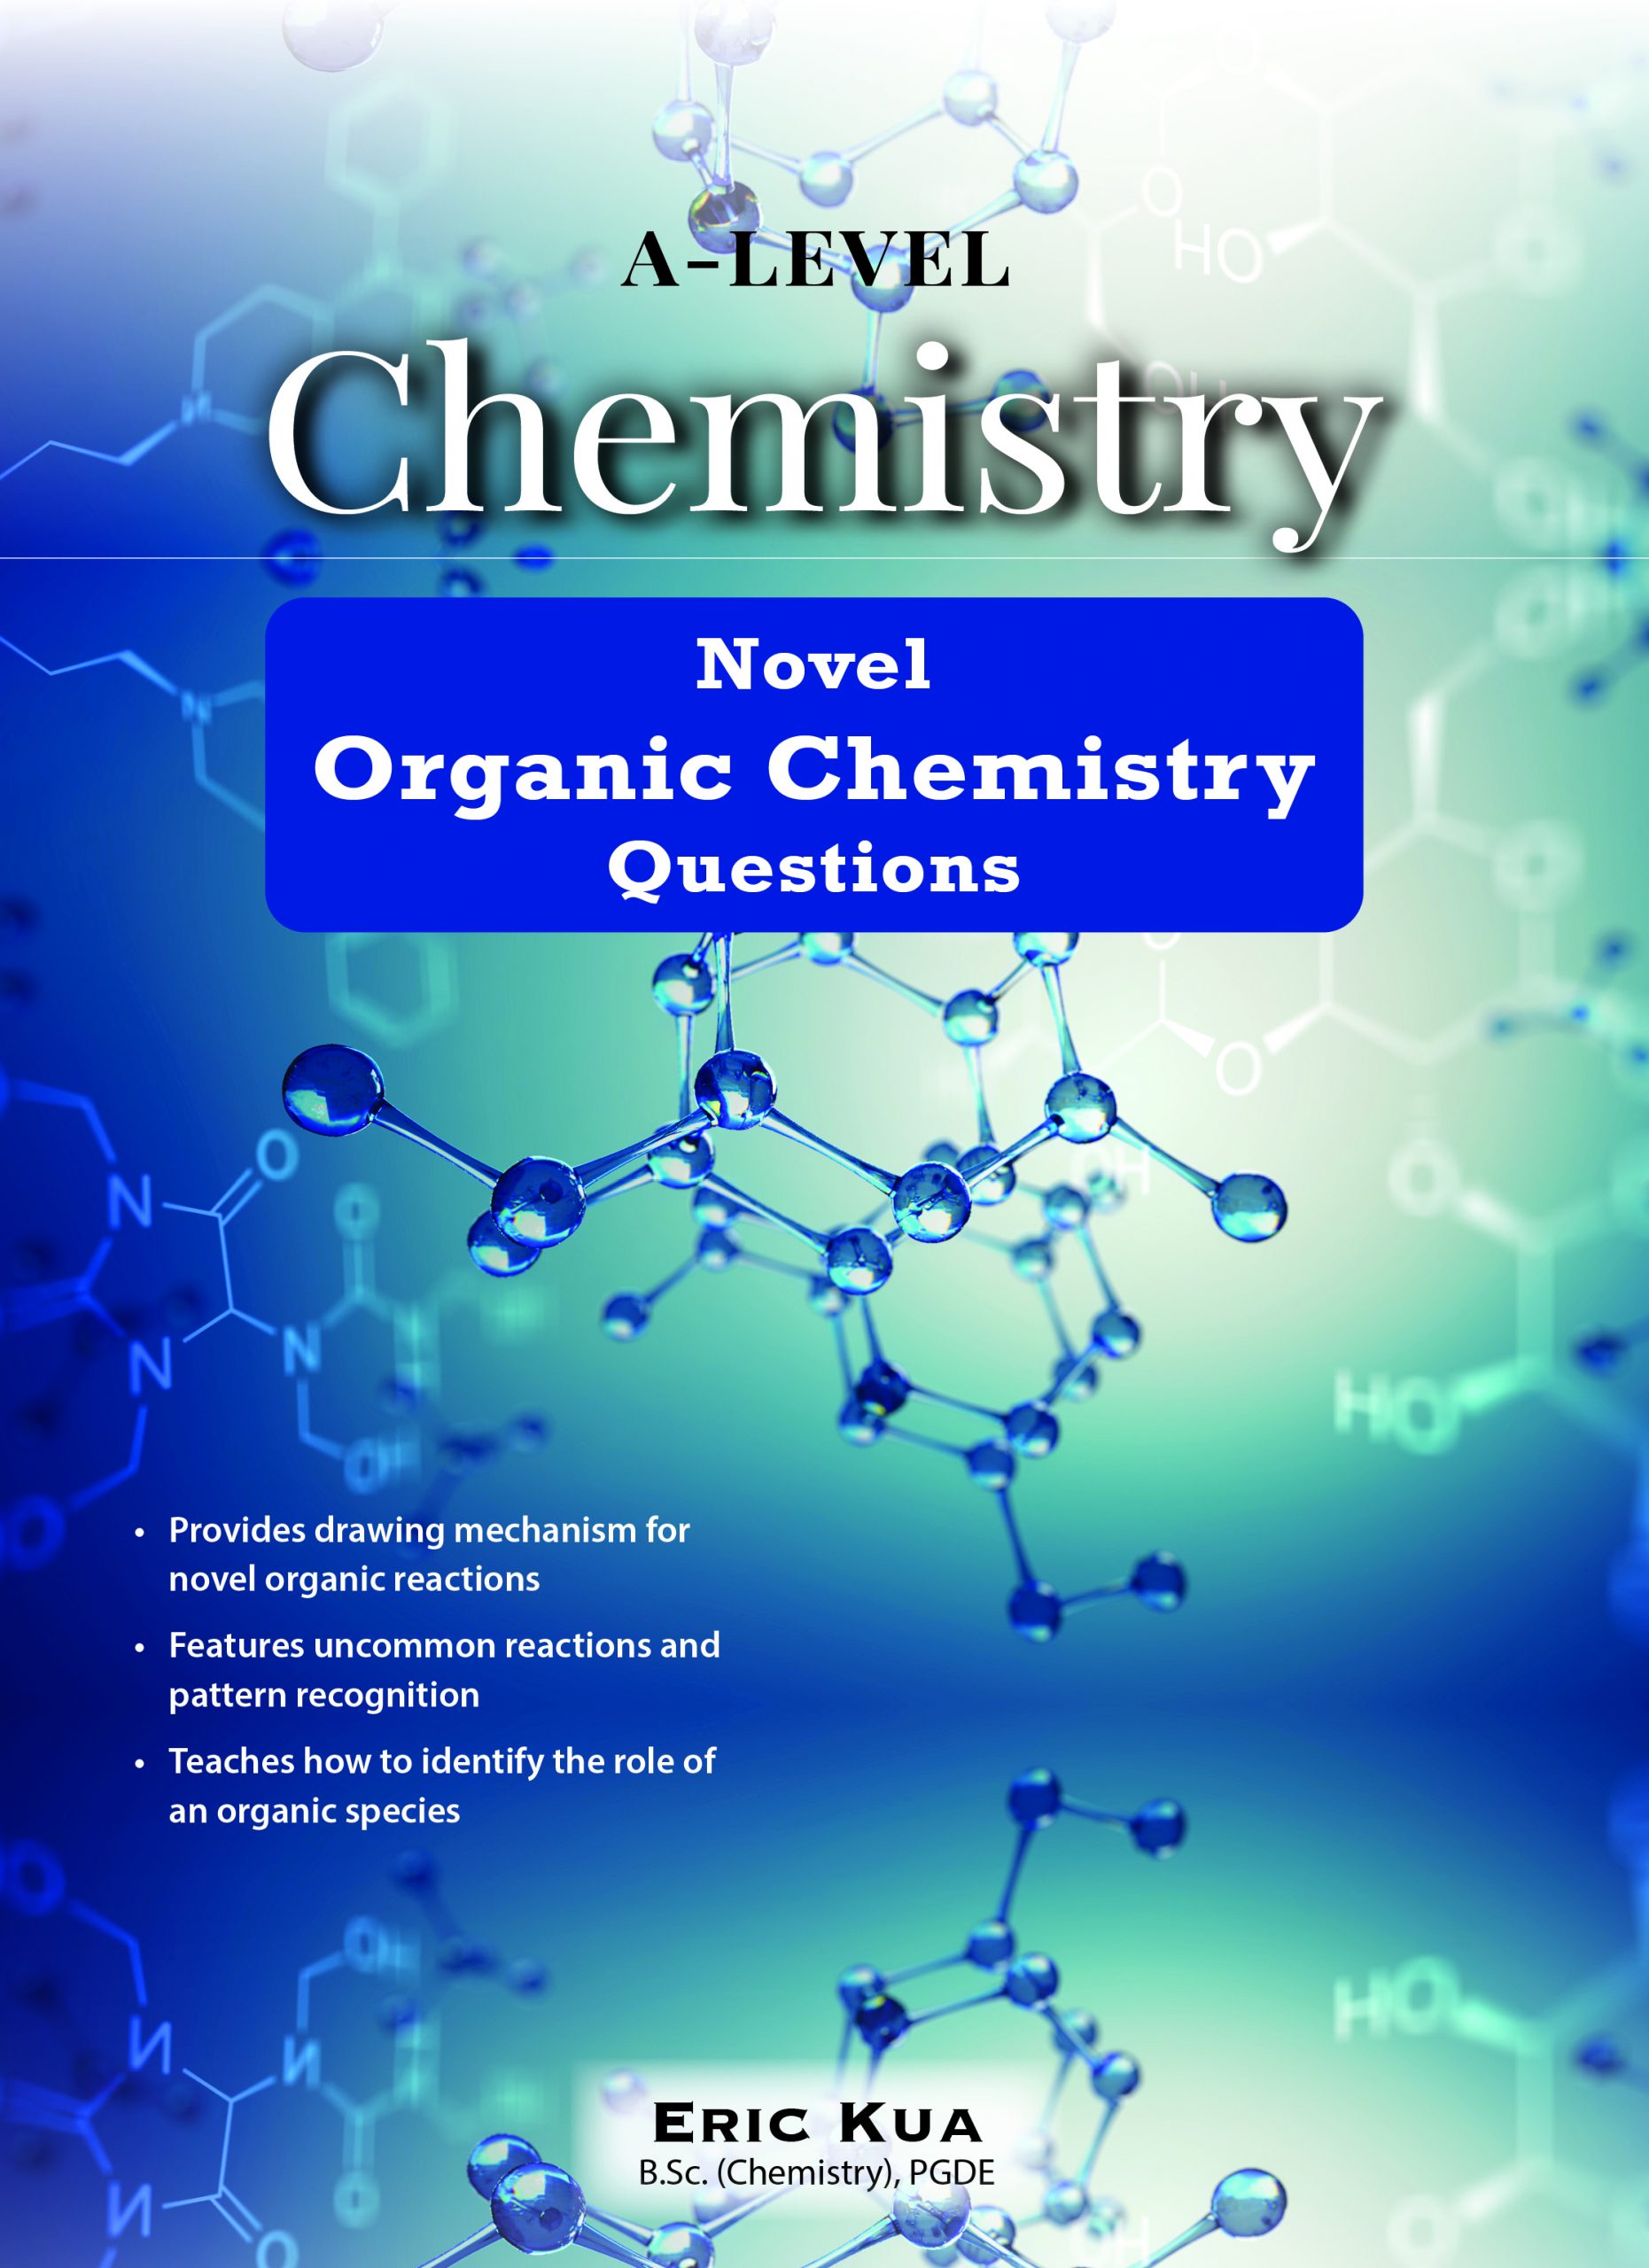 Education　Services　Chemistry　Novel　CPD　A-Level　Questions　Ltd　Chemistry　Pte　Organic　Singapore